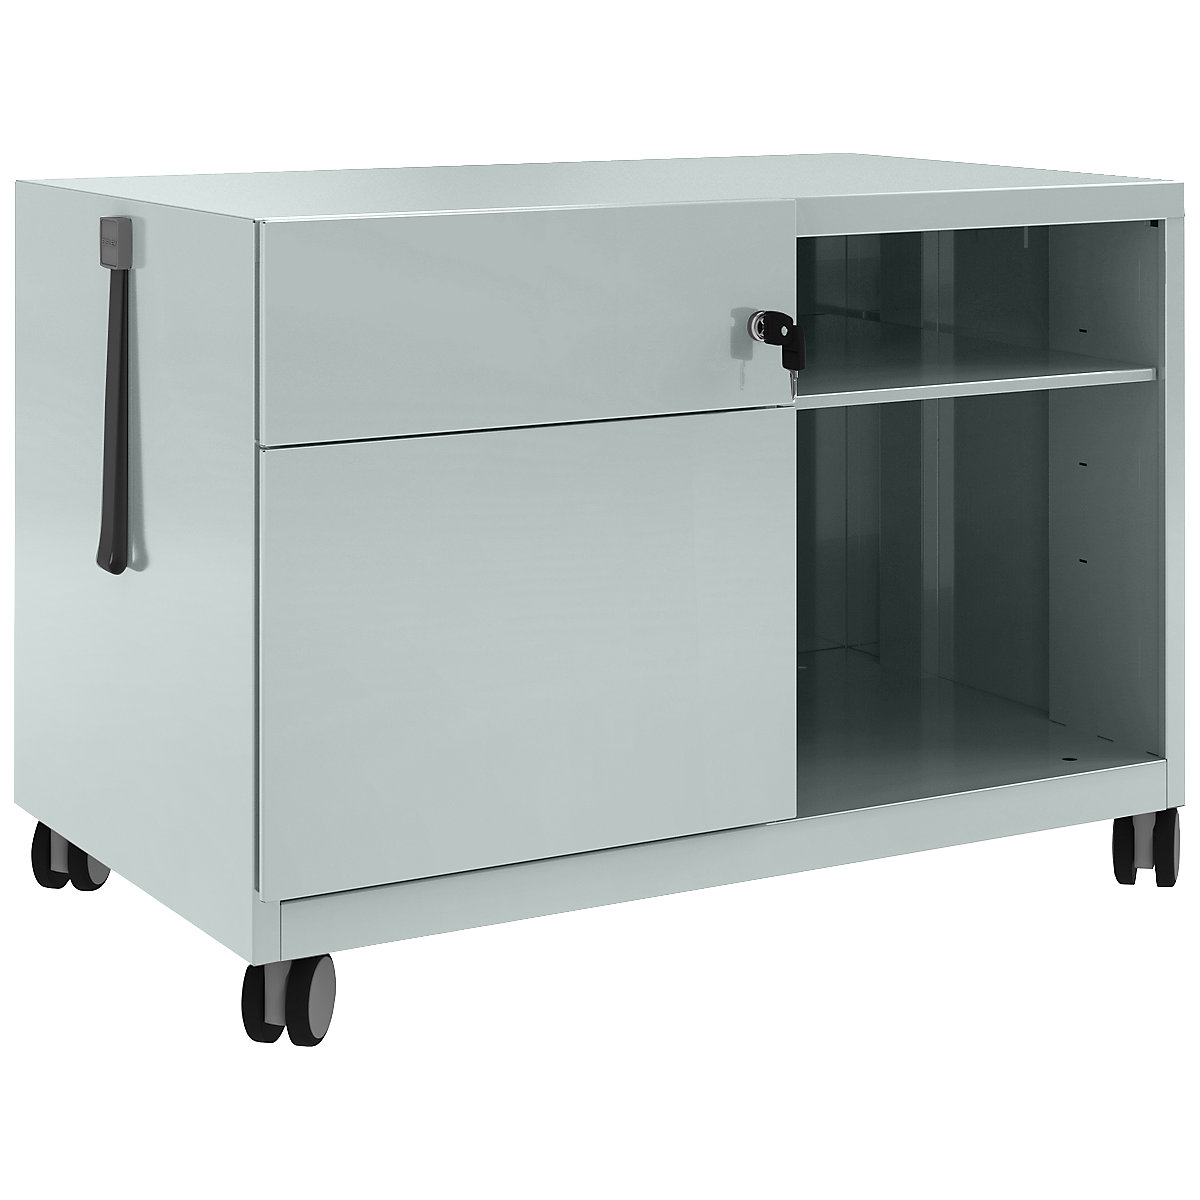 Chariot Note&trade; CADDY, h x l x p 563 x 800 x 490 mm - BISLEY